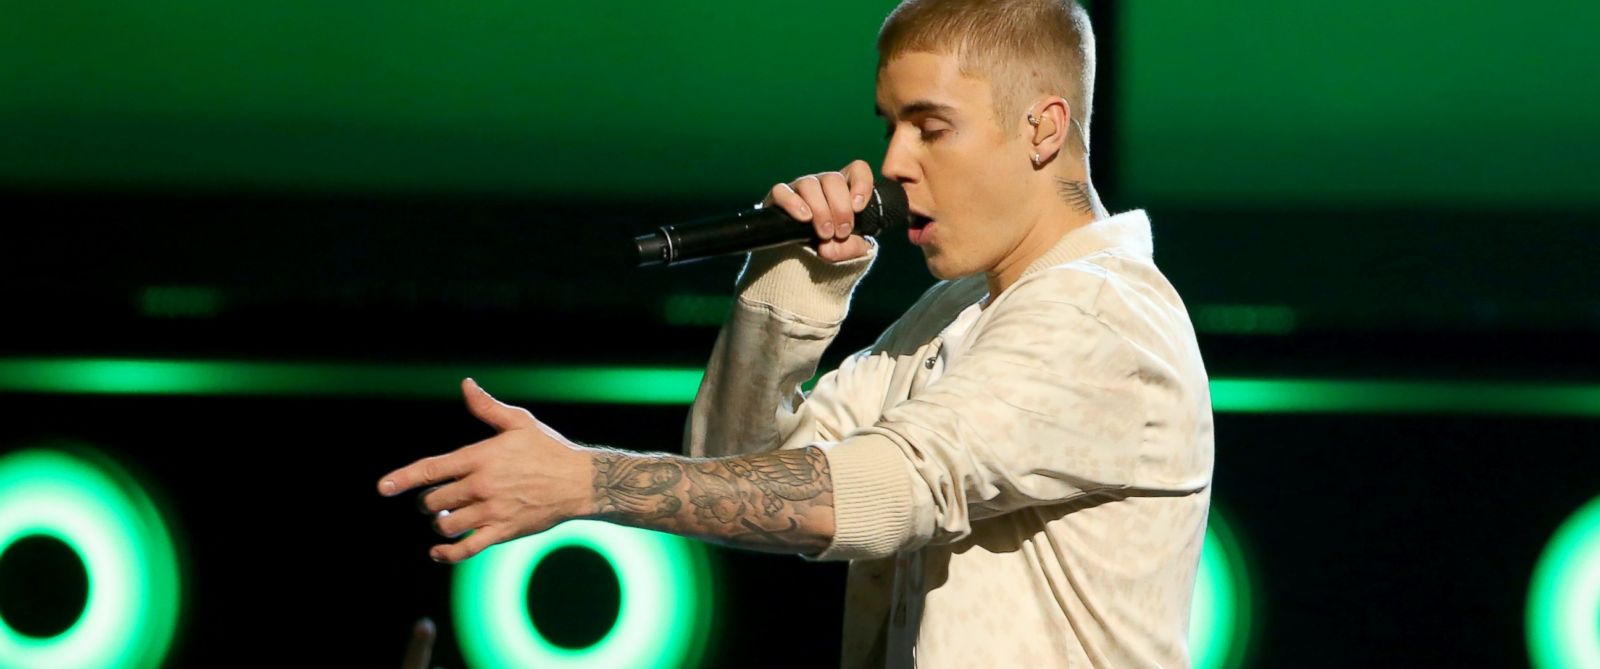 Justin Bieber Falls Onstage During Canada Concert - ABC News